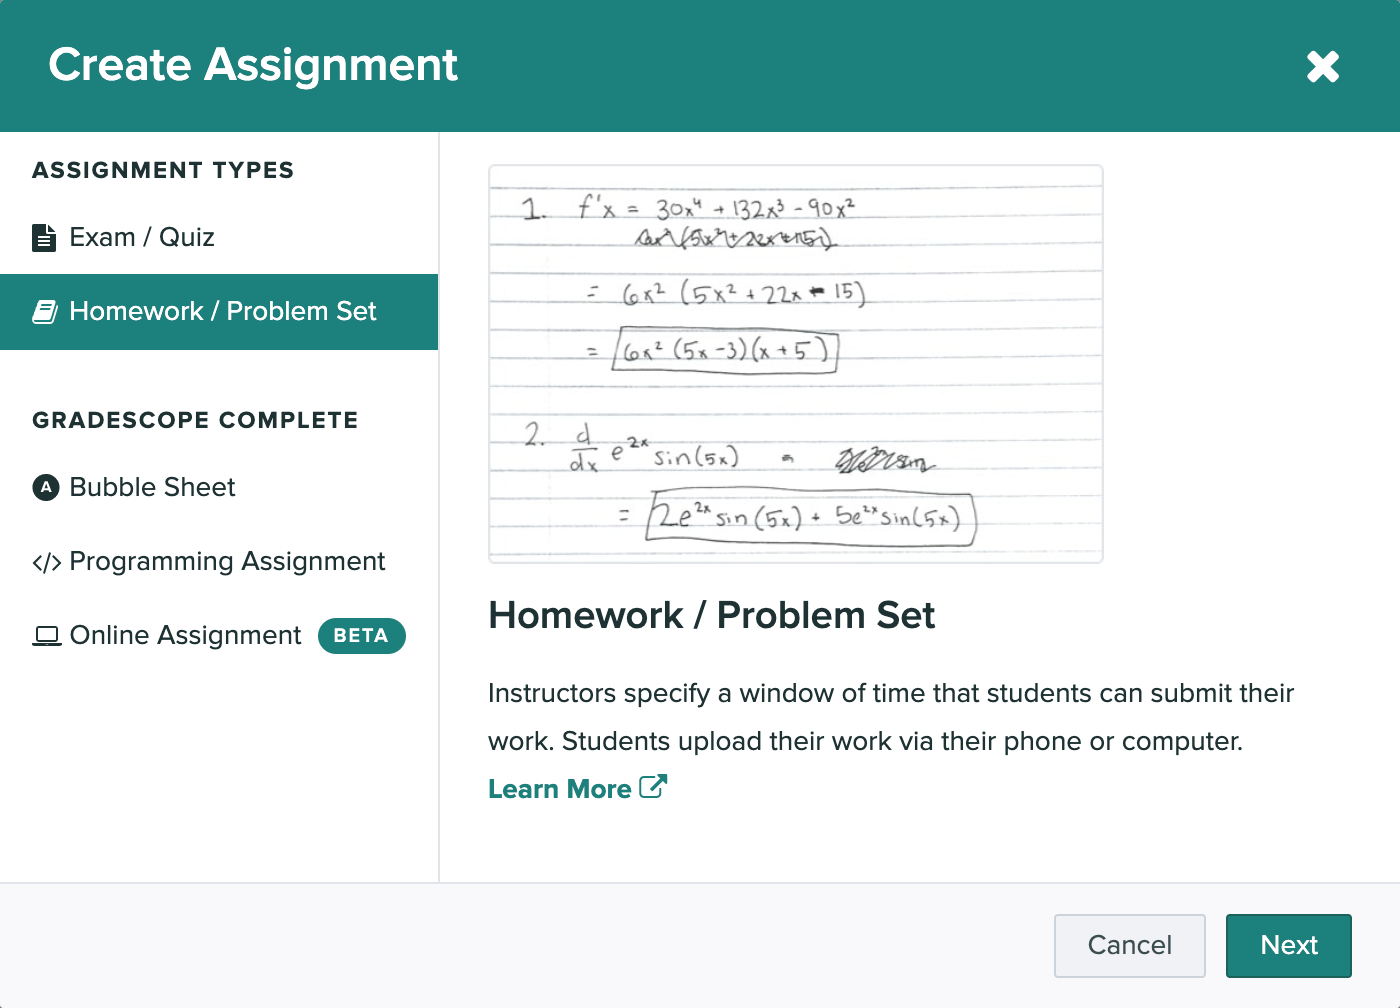 The create assignment modal is open and the homework / problem set option is selected.